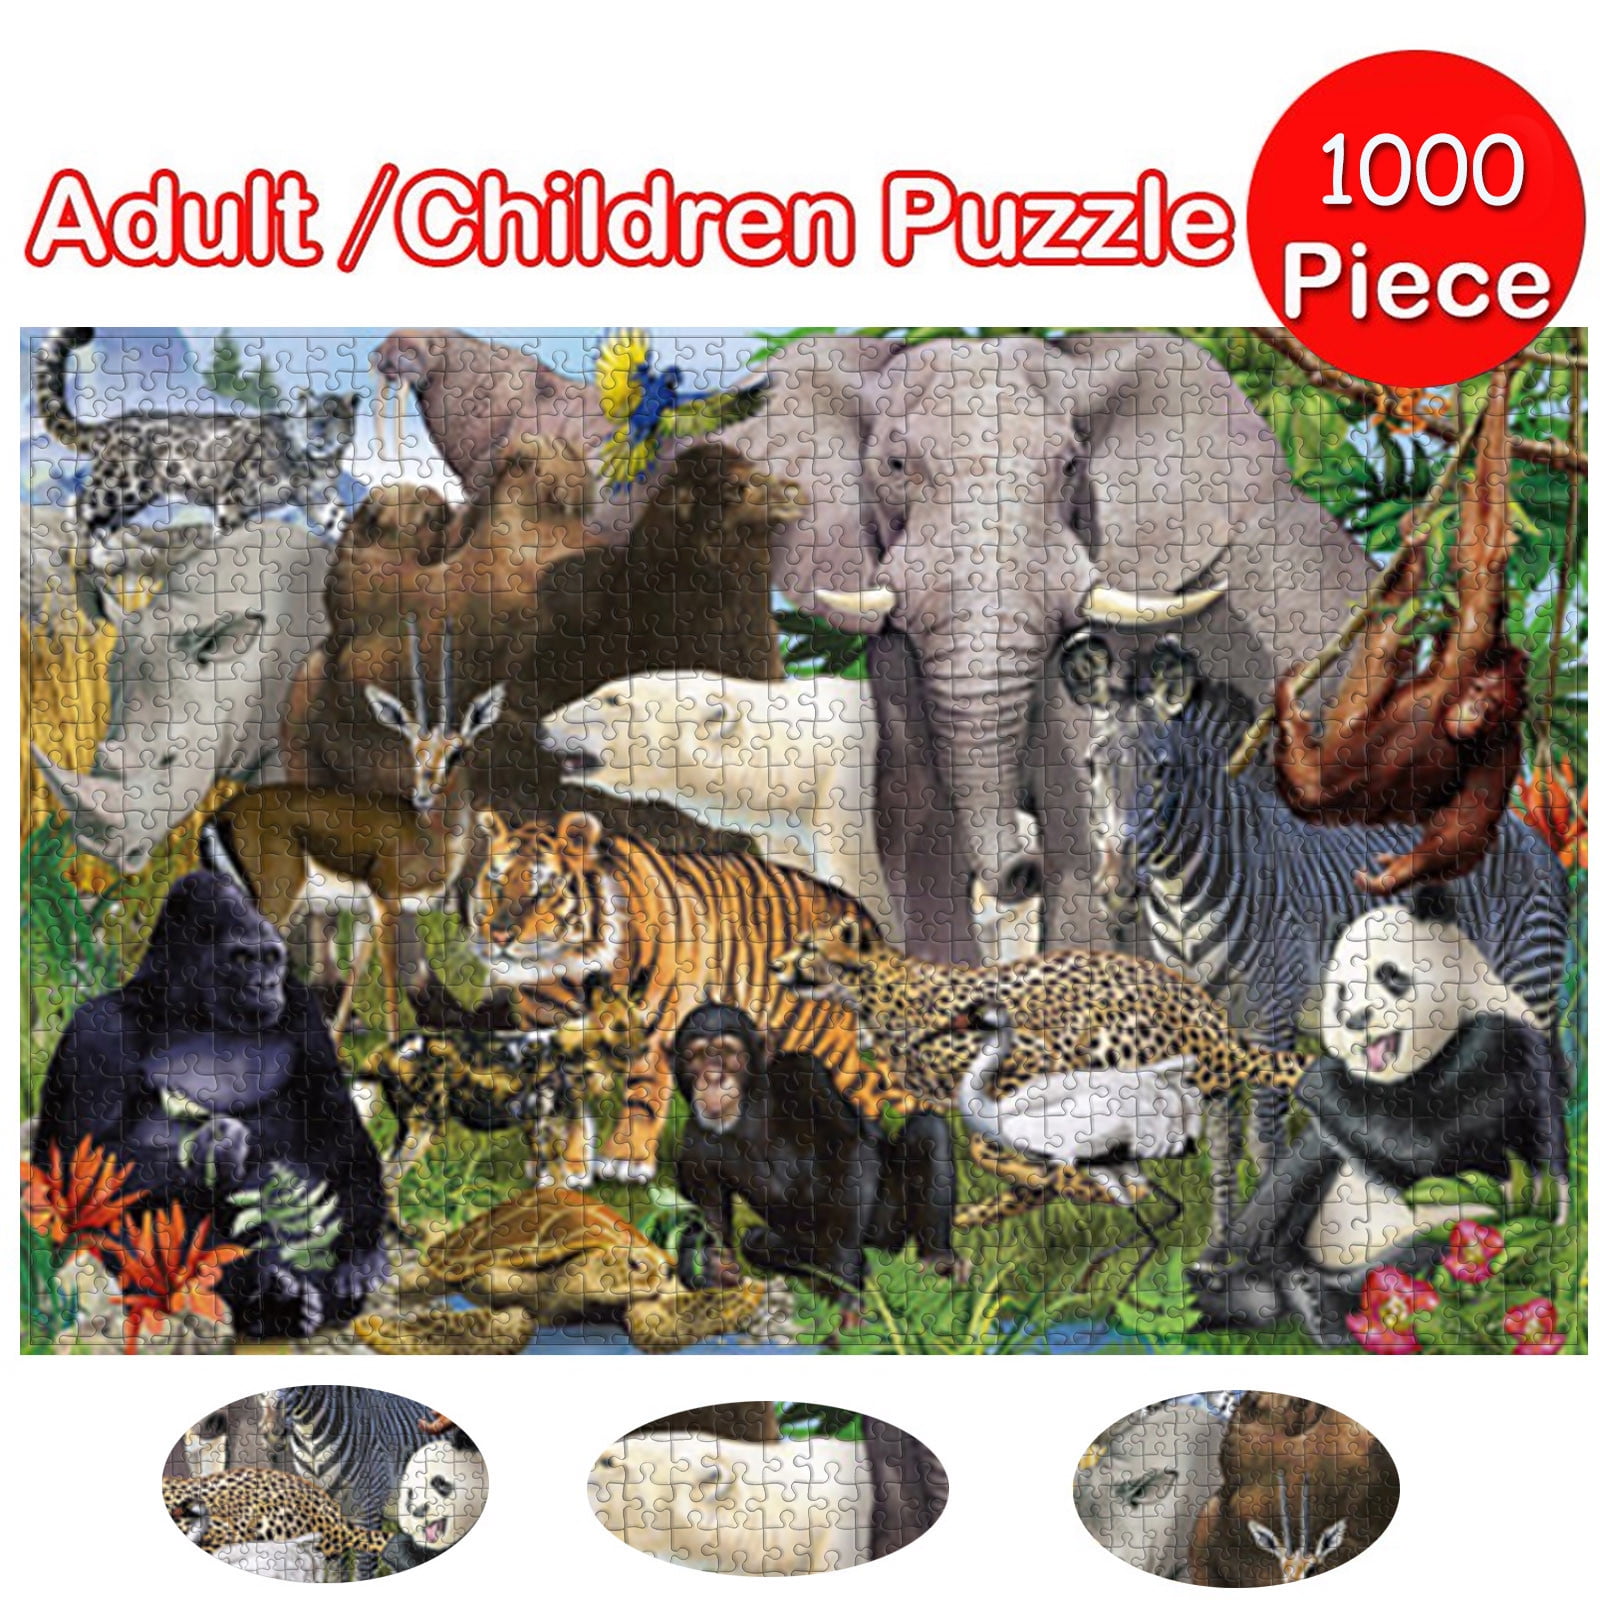 Jigsaw Puzzle 3000 Piece for Adults Teens Kids and Family Dancer-3000 Wooden igsaw Puzzles 3000 Pieces for Adults Family Friends 3000 Pieces Space Saver Gift for Puzzle Lover